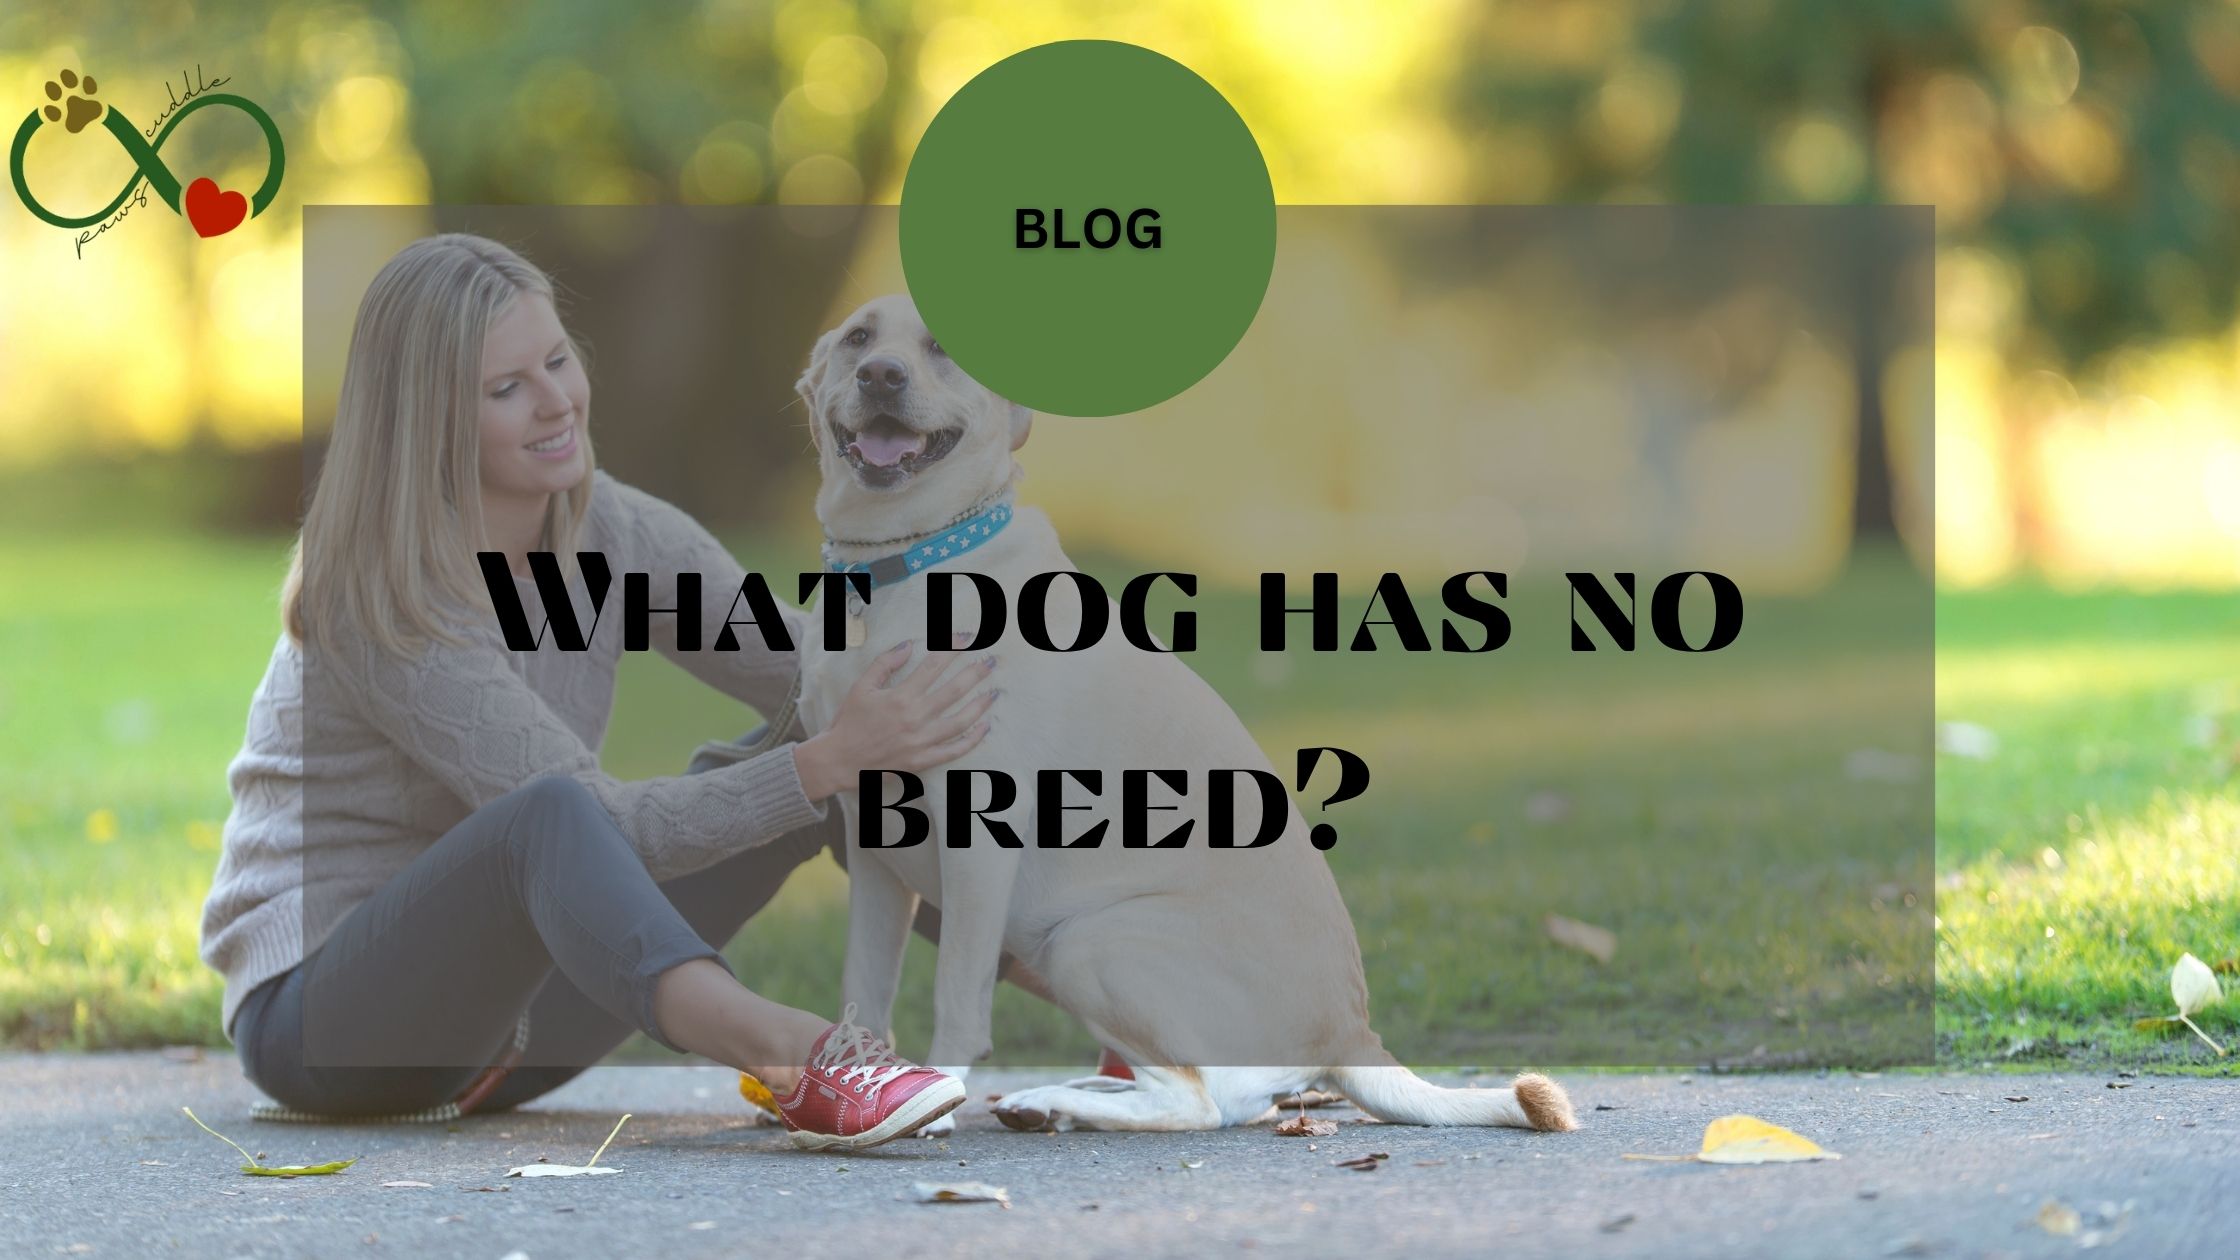 What dog has no breed?